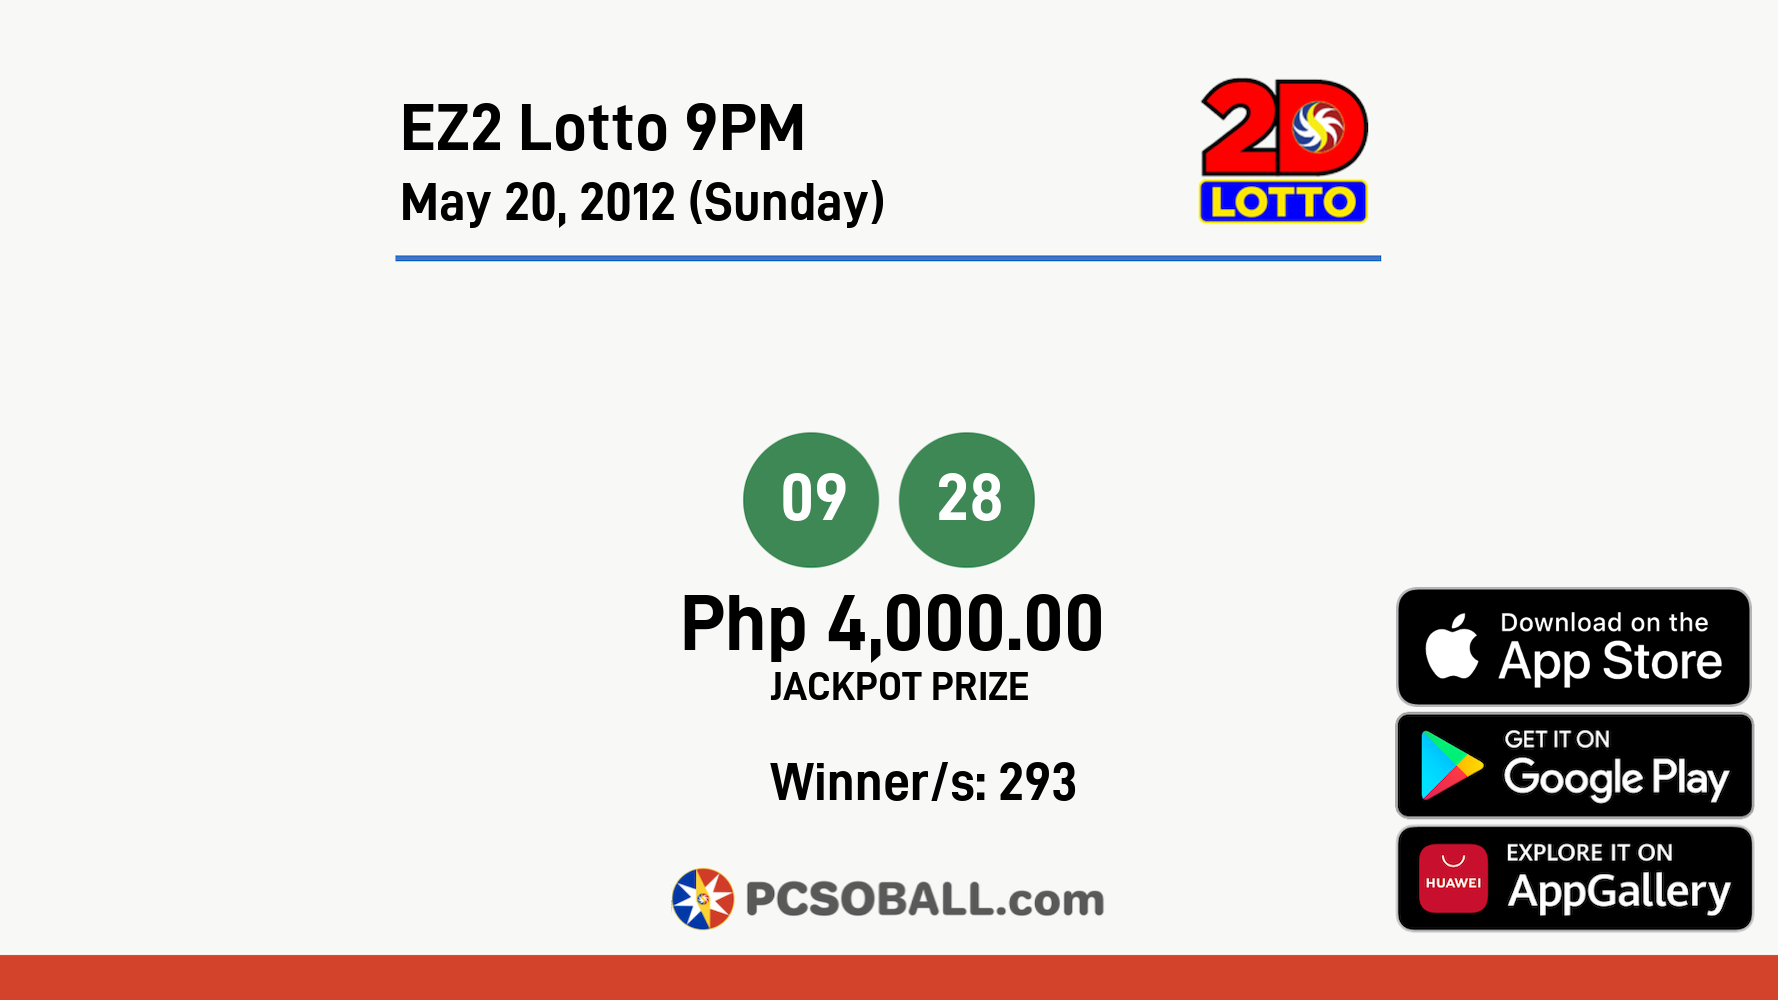 EZ2 Lotto 9PM May 20, 2012 (Sunday) Result